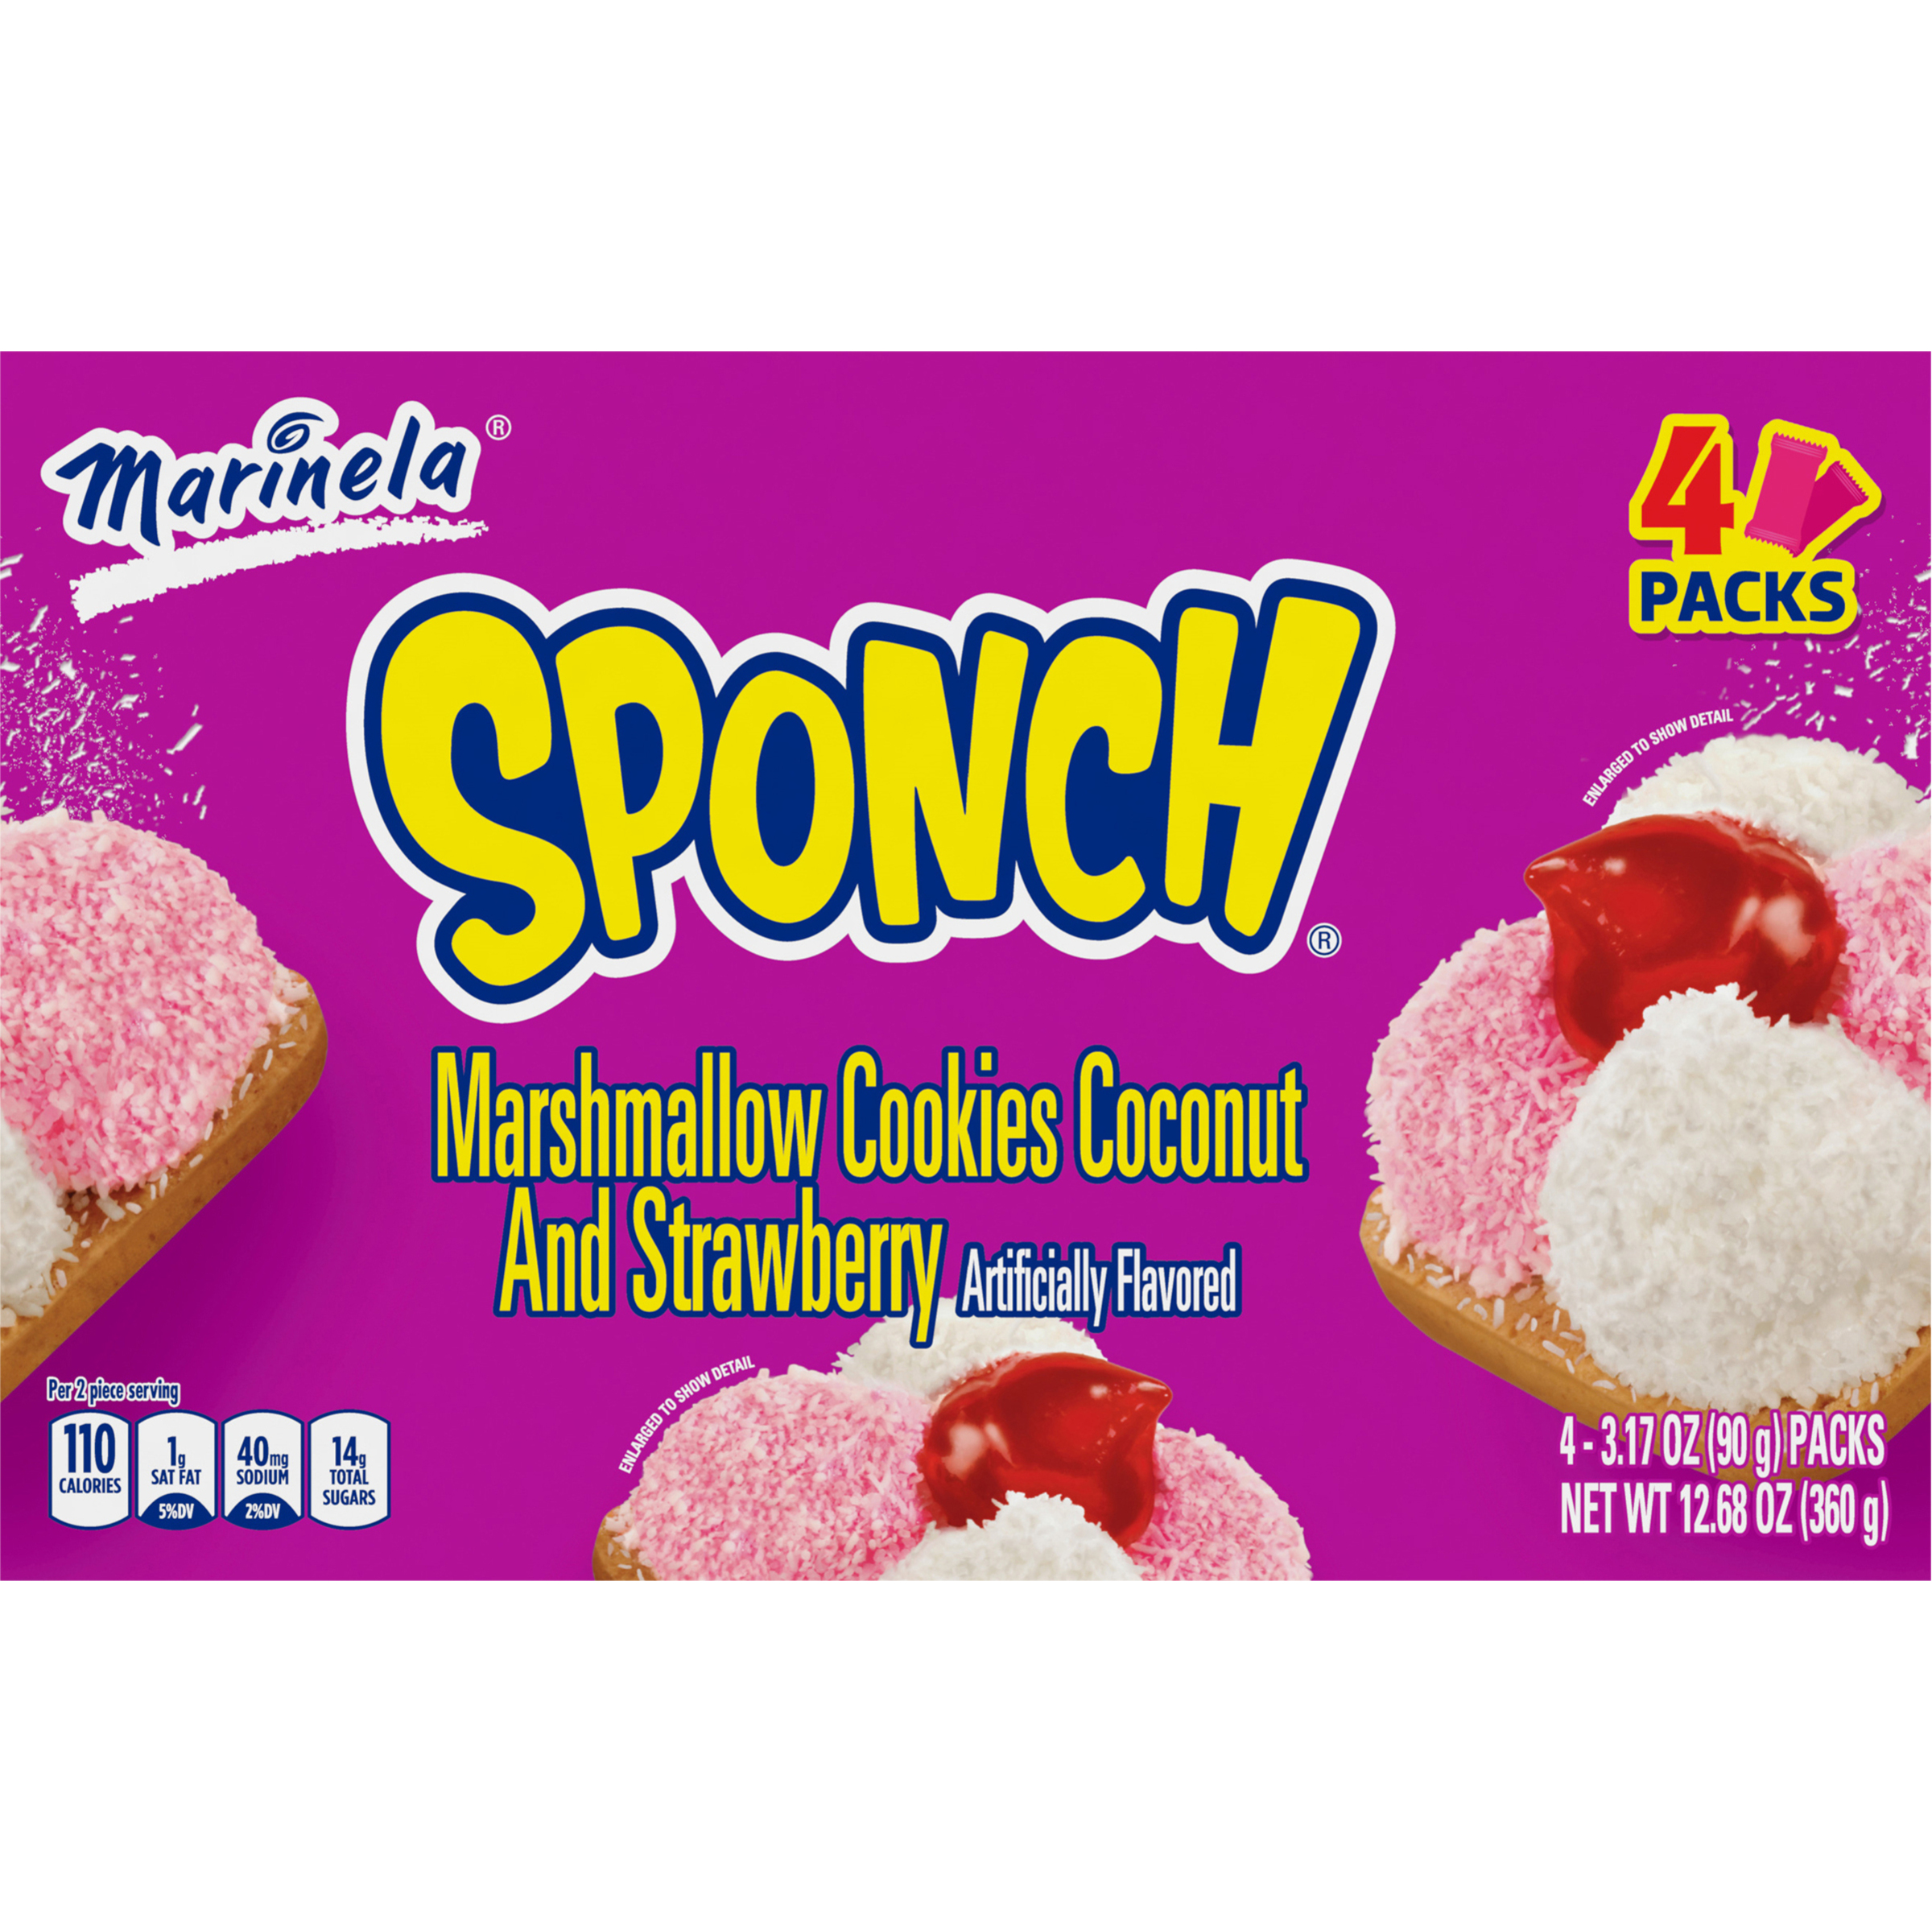 Marinela Sponch Marshmallow Cookies, 4 count, 12.68 oz - image 1 of 7